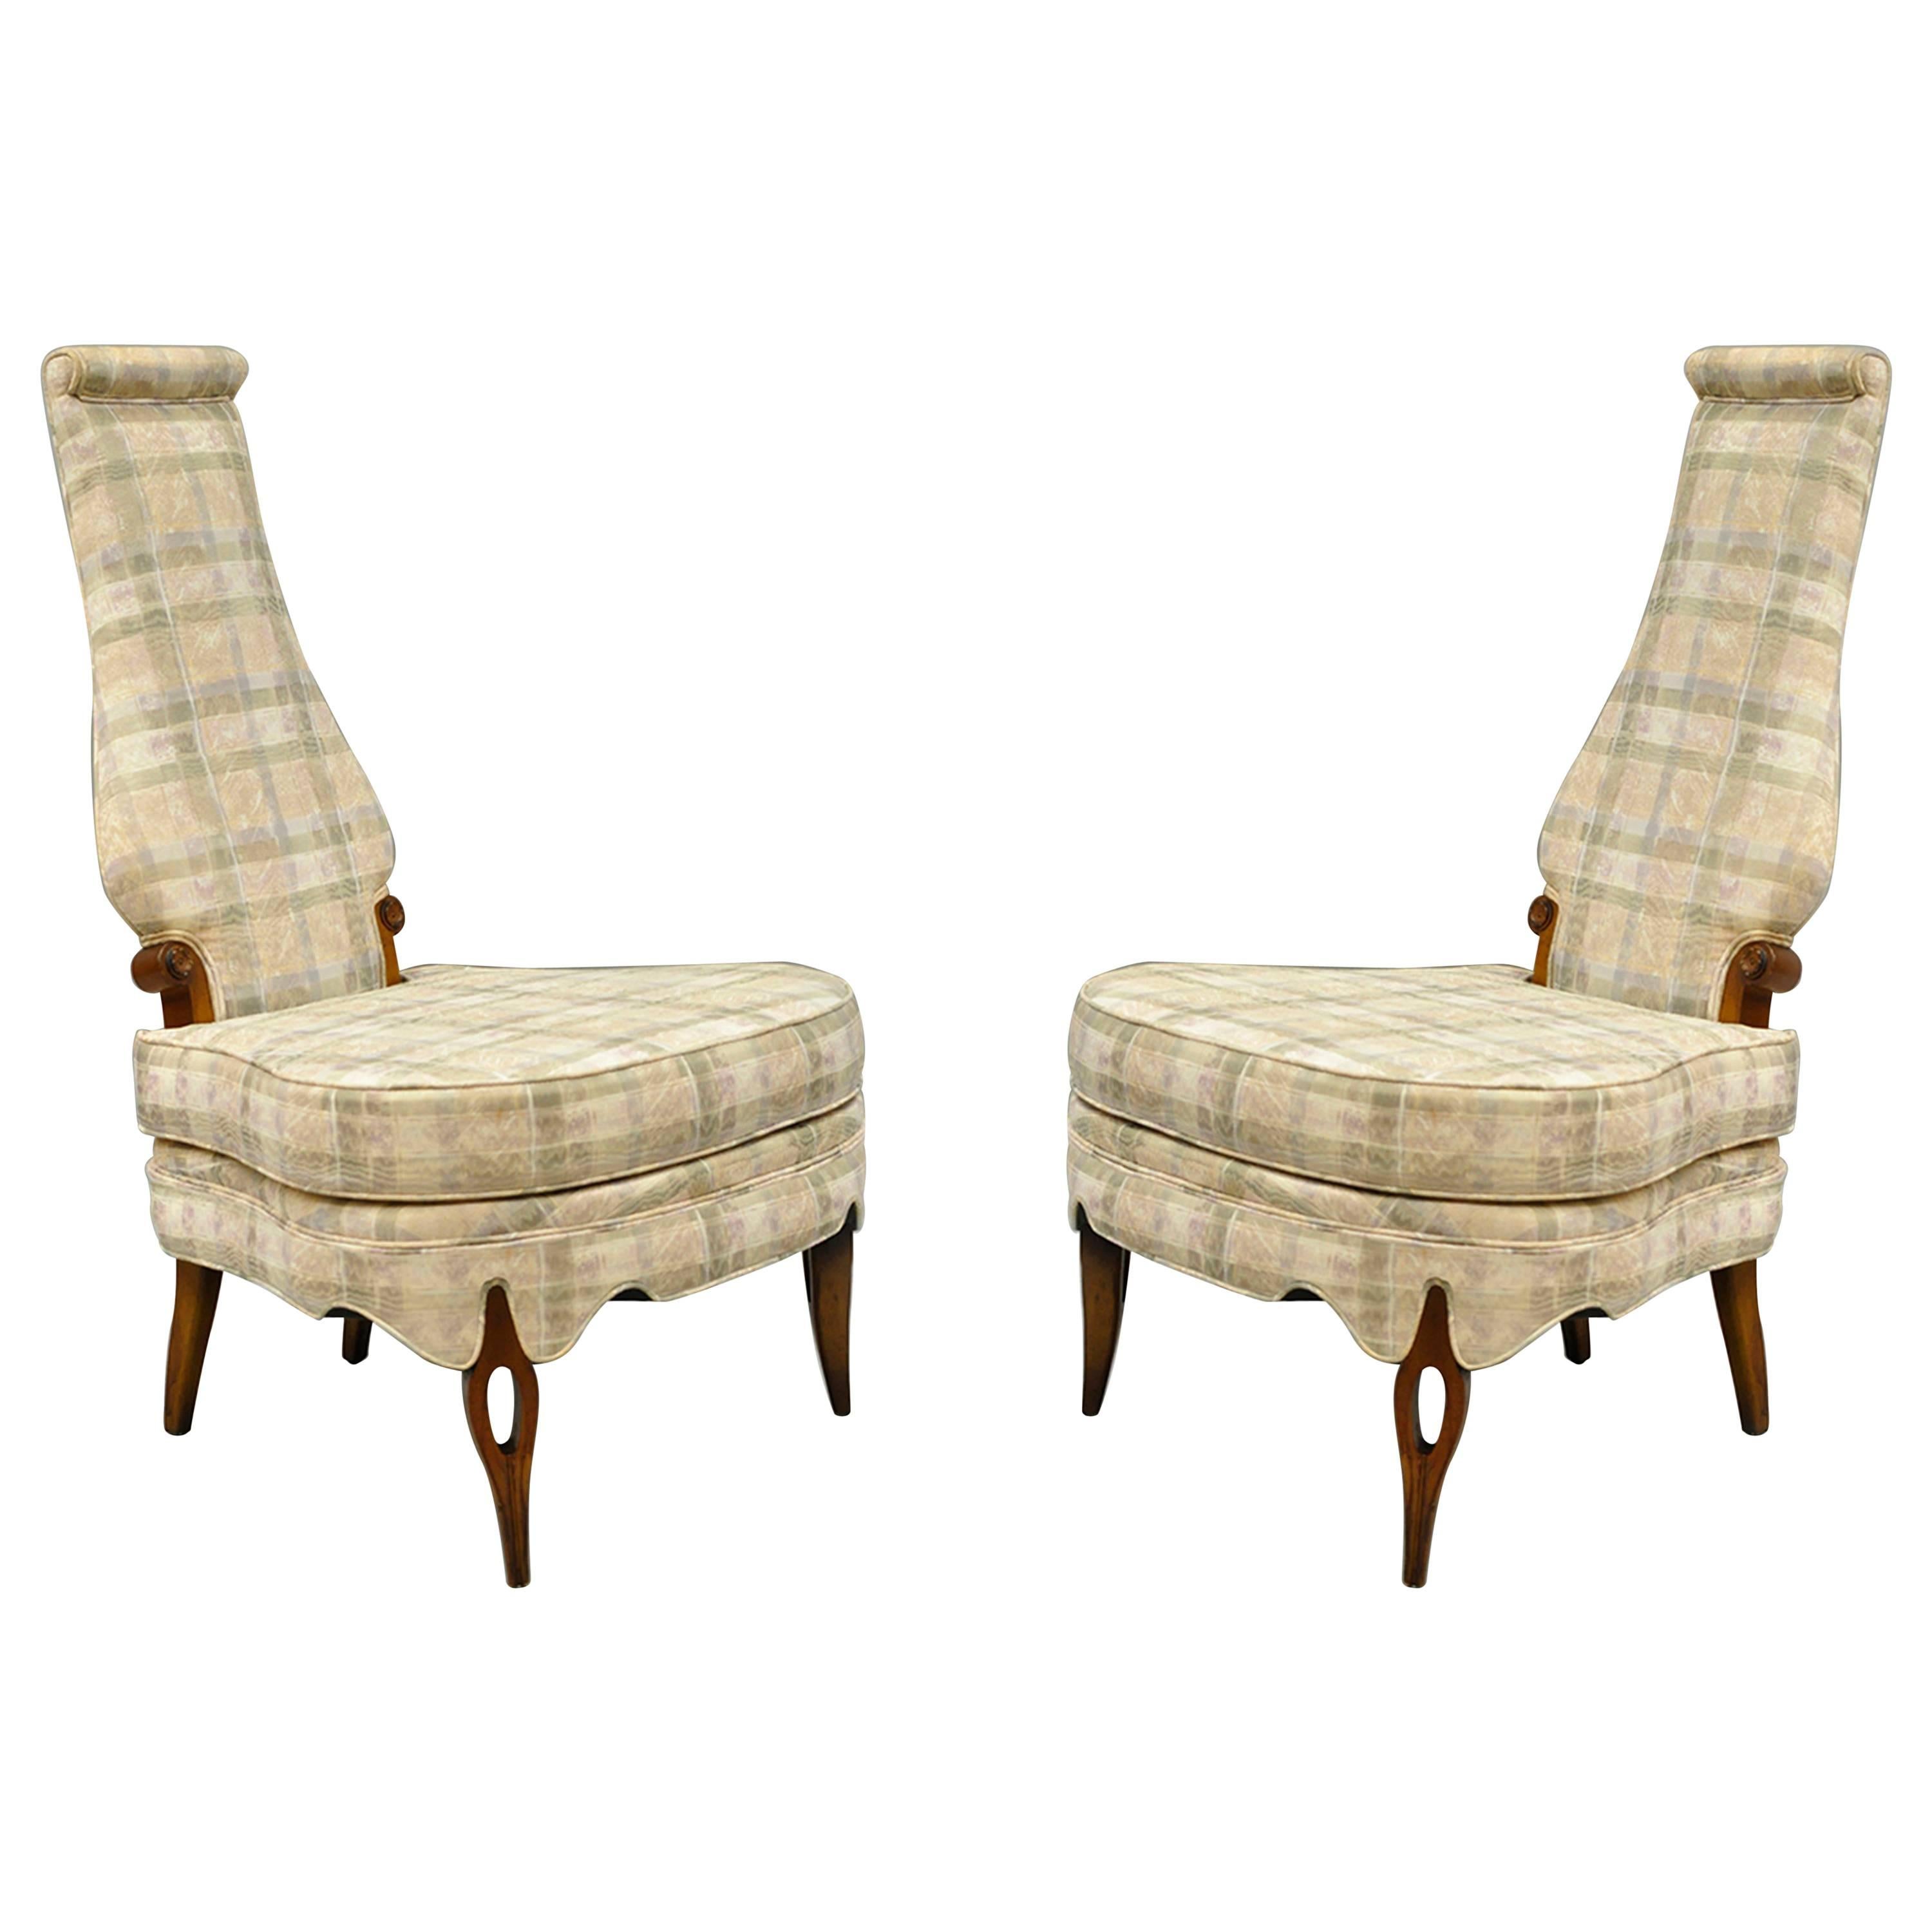 Pair of Hollywood Regency High Back Slipper Lounge Chairs After Dorothy Draper For Sale